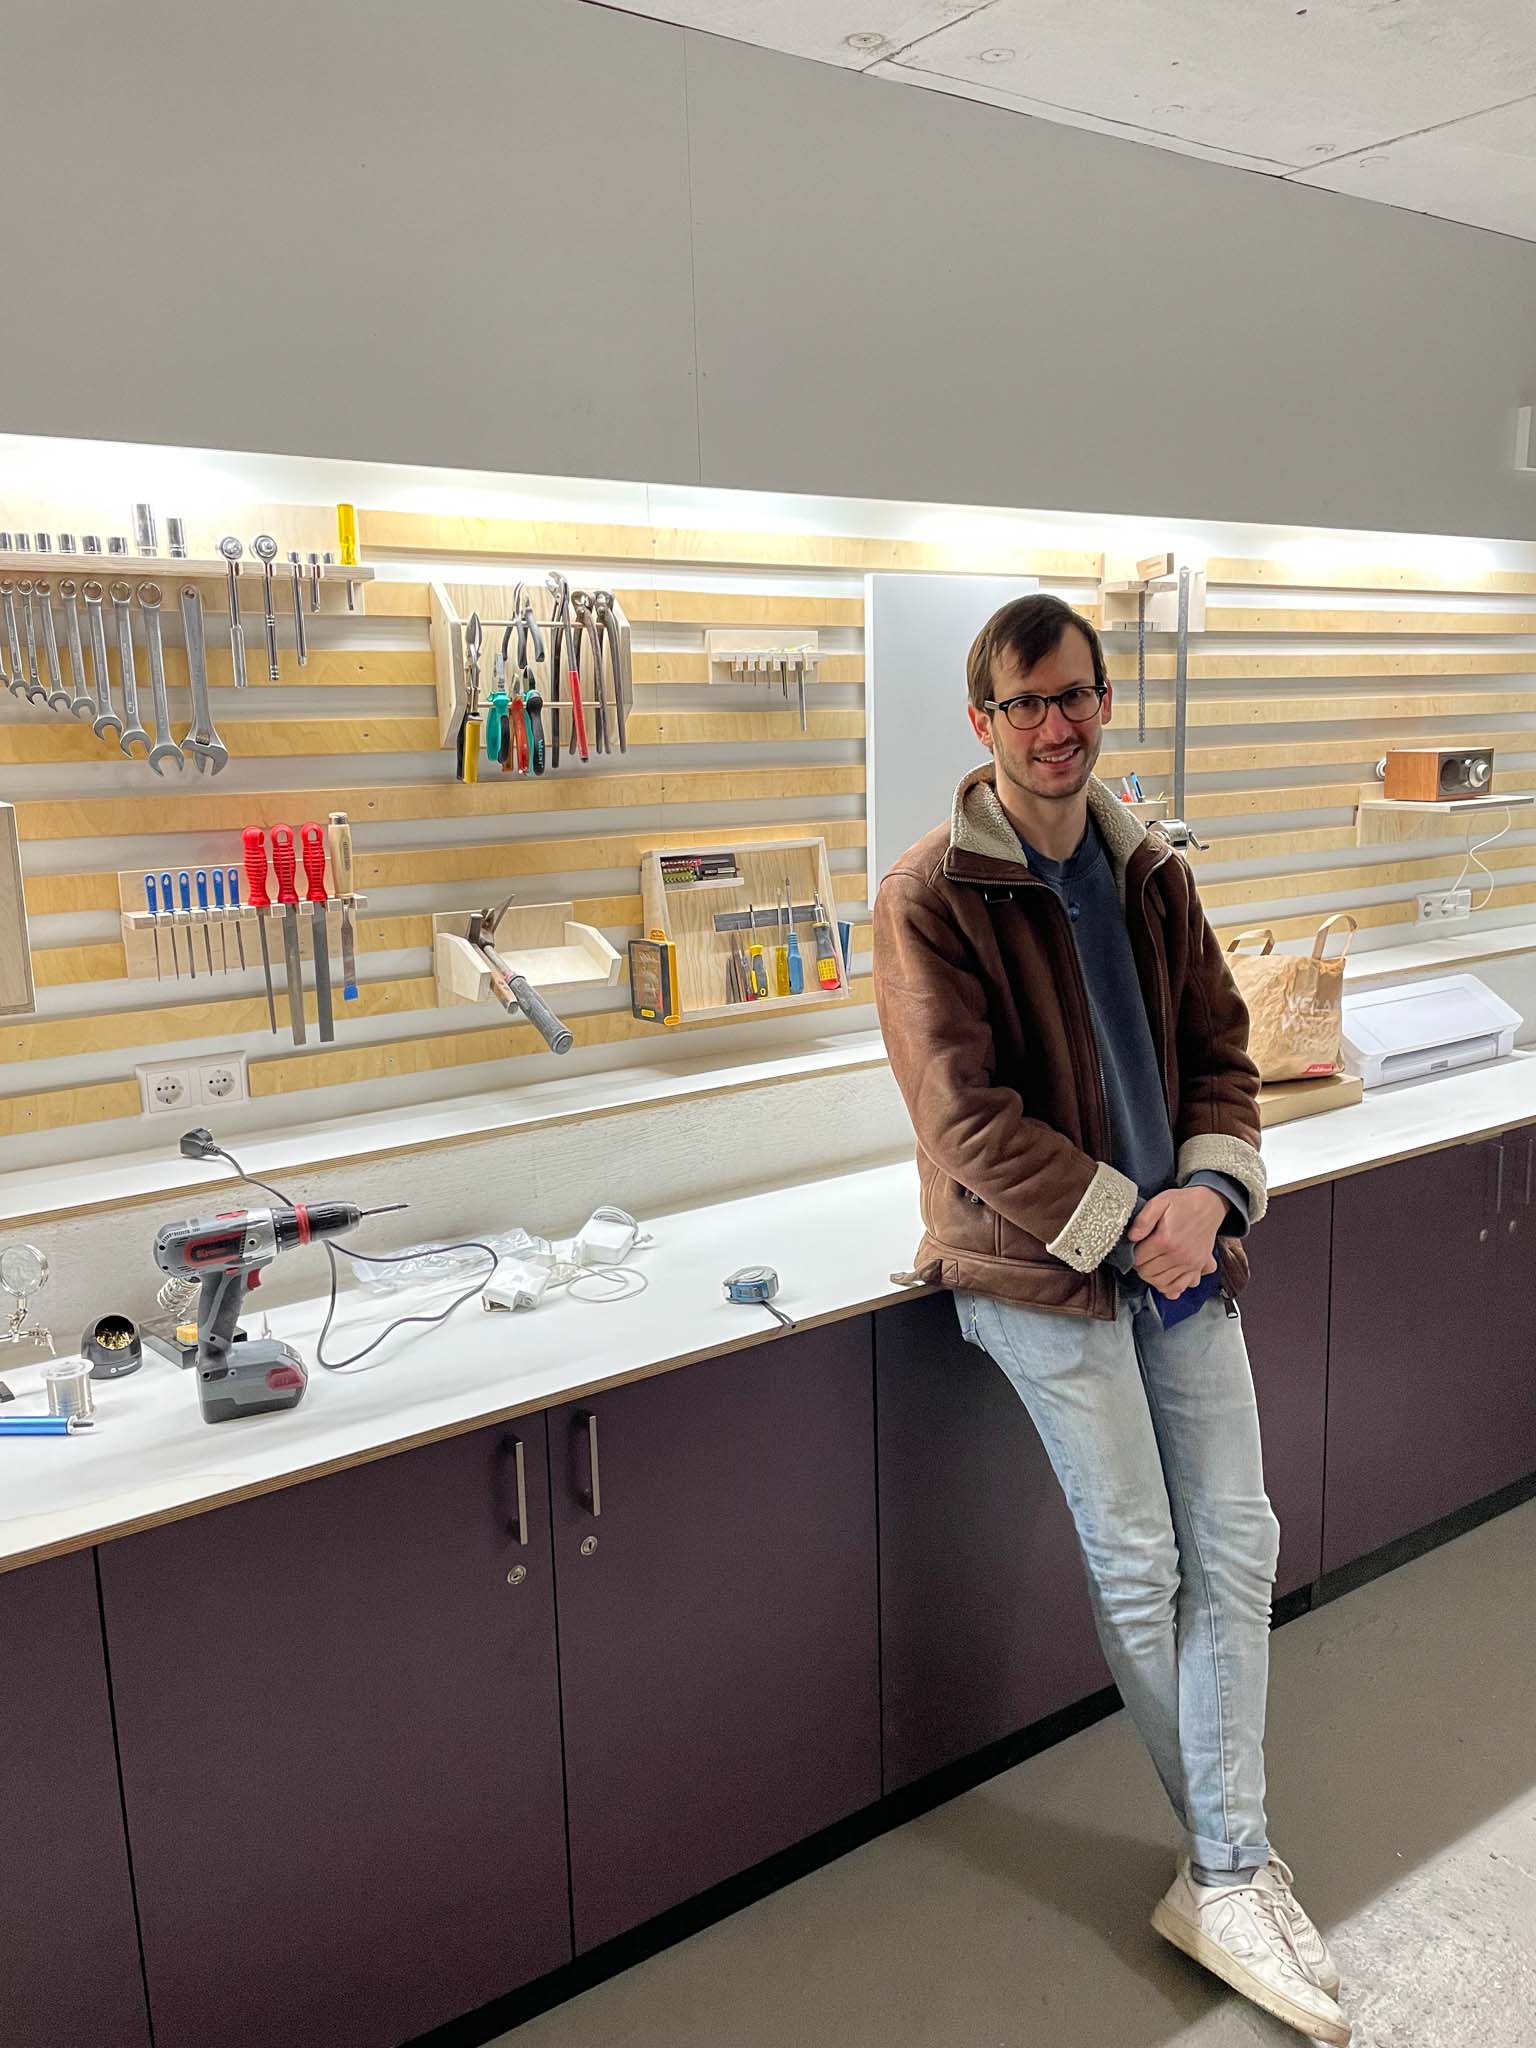 Lenny Leiter, workish’s founder and manager, leans against a workbench in the space. Visible behind him are the custom shelves onto which a myriad of tools fit perfectly.